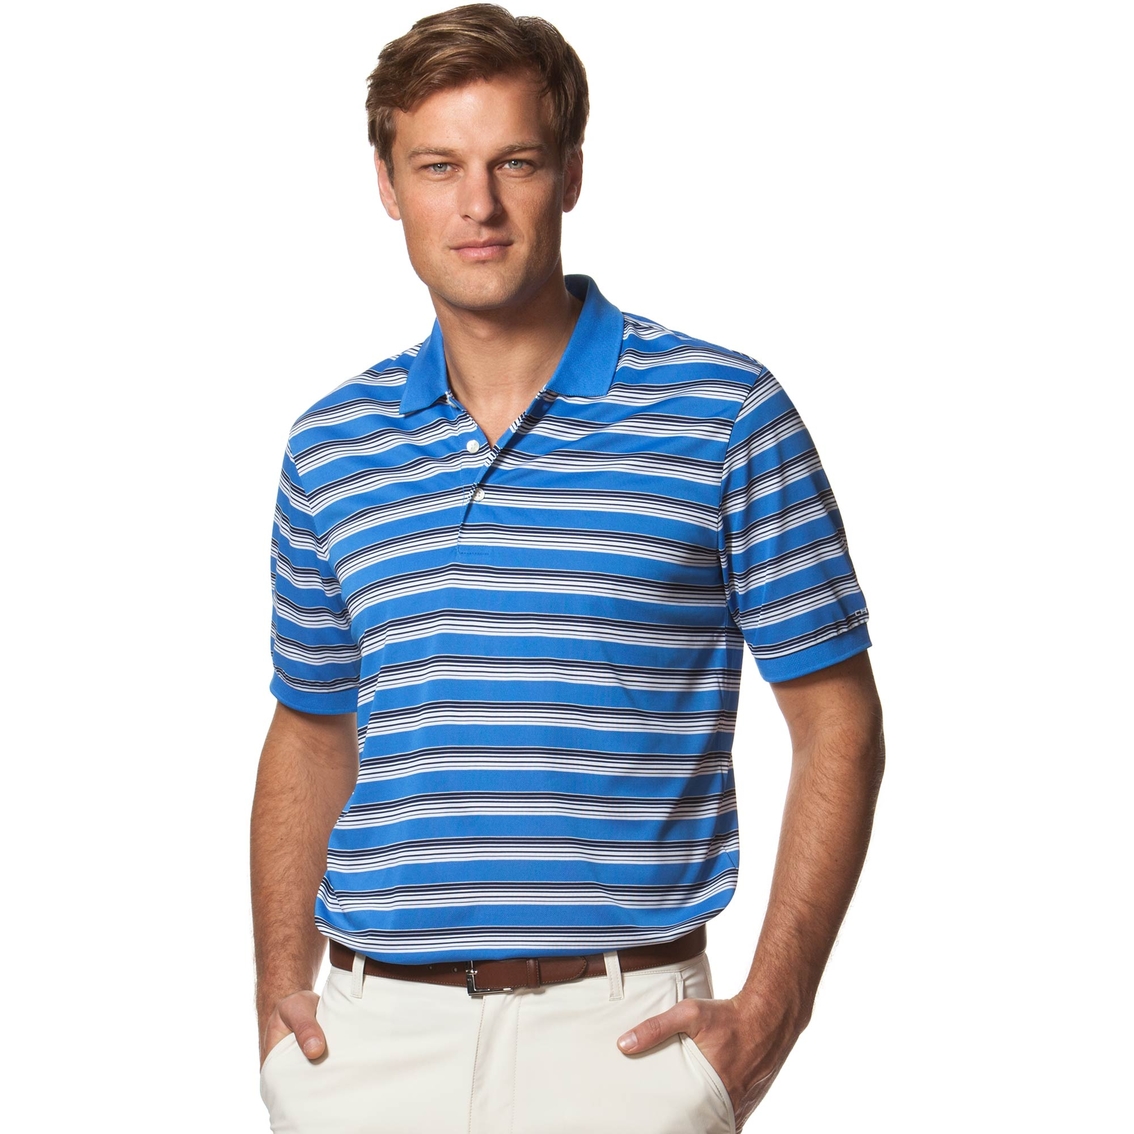 Chaps Striped Pique Knit Polo Shirt | Shirts | Clothing & Accessories ...